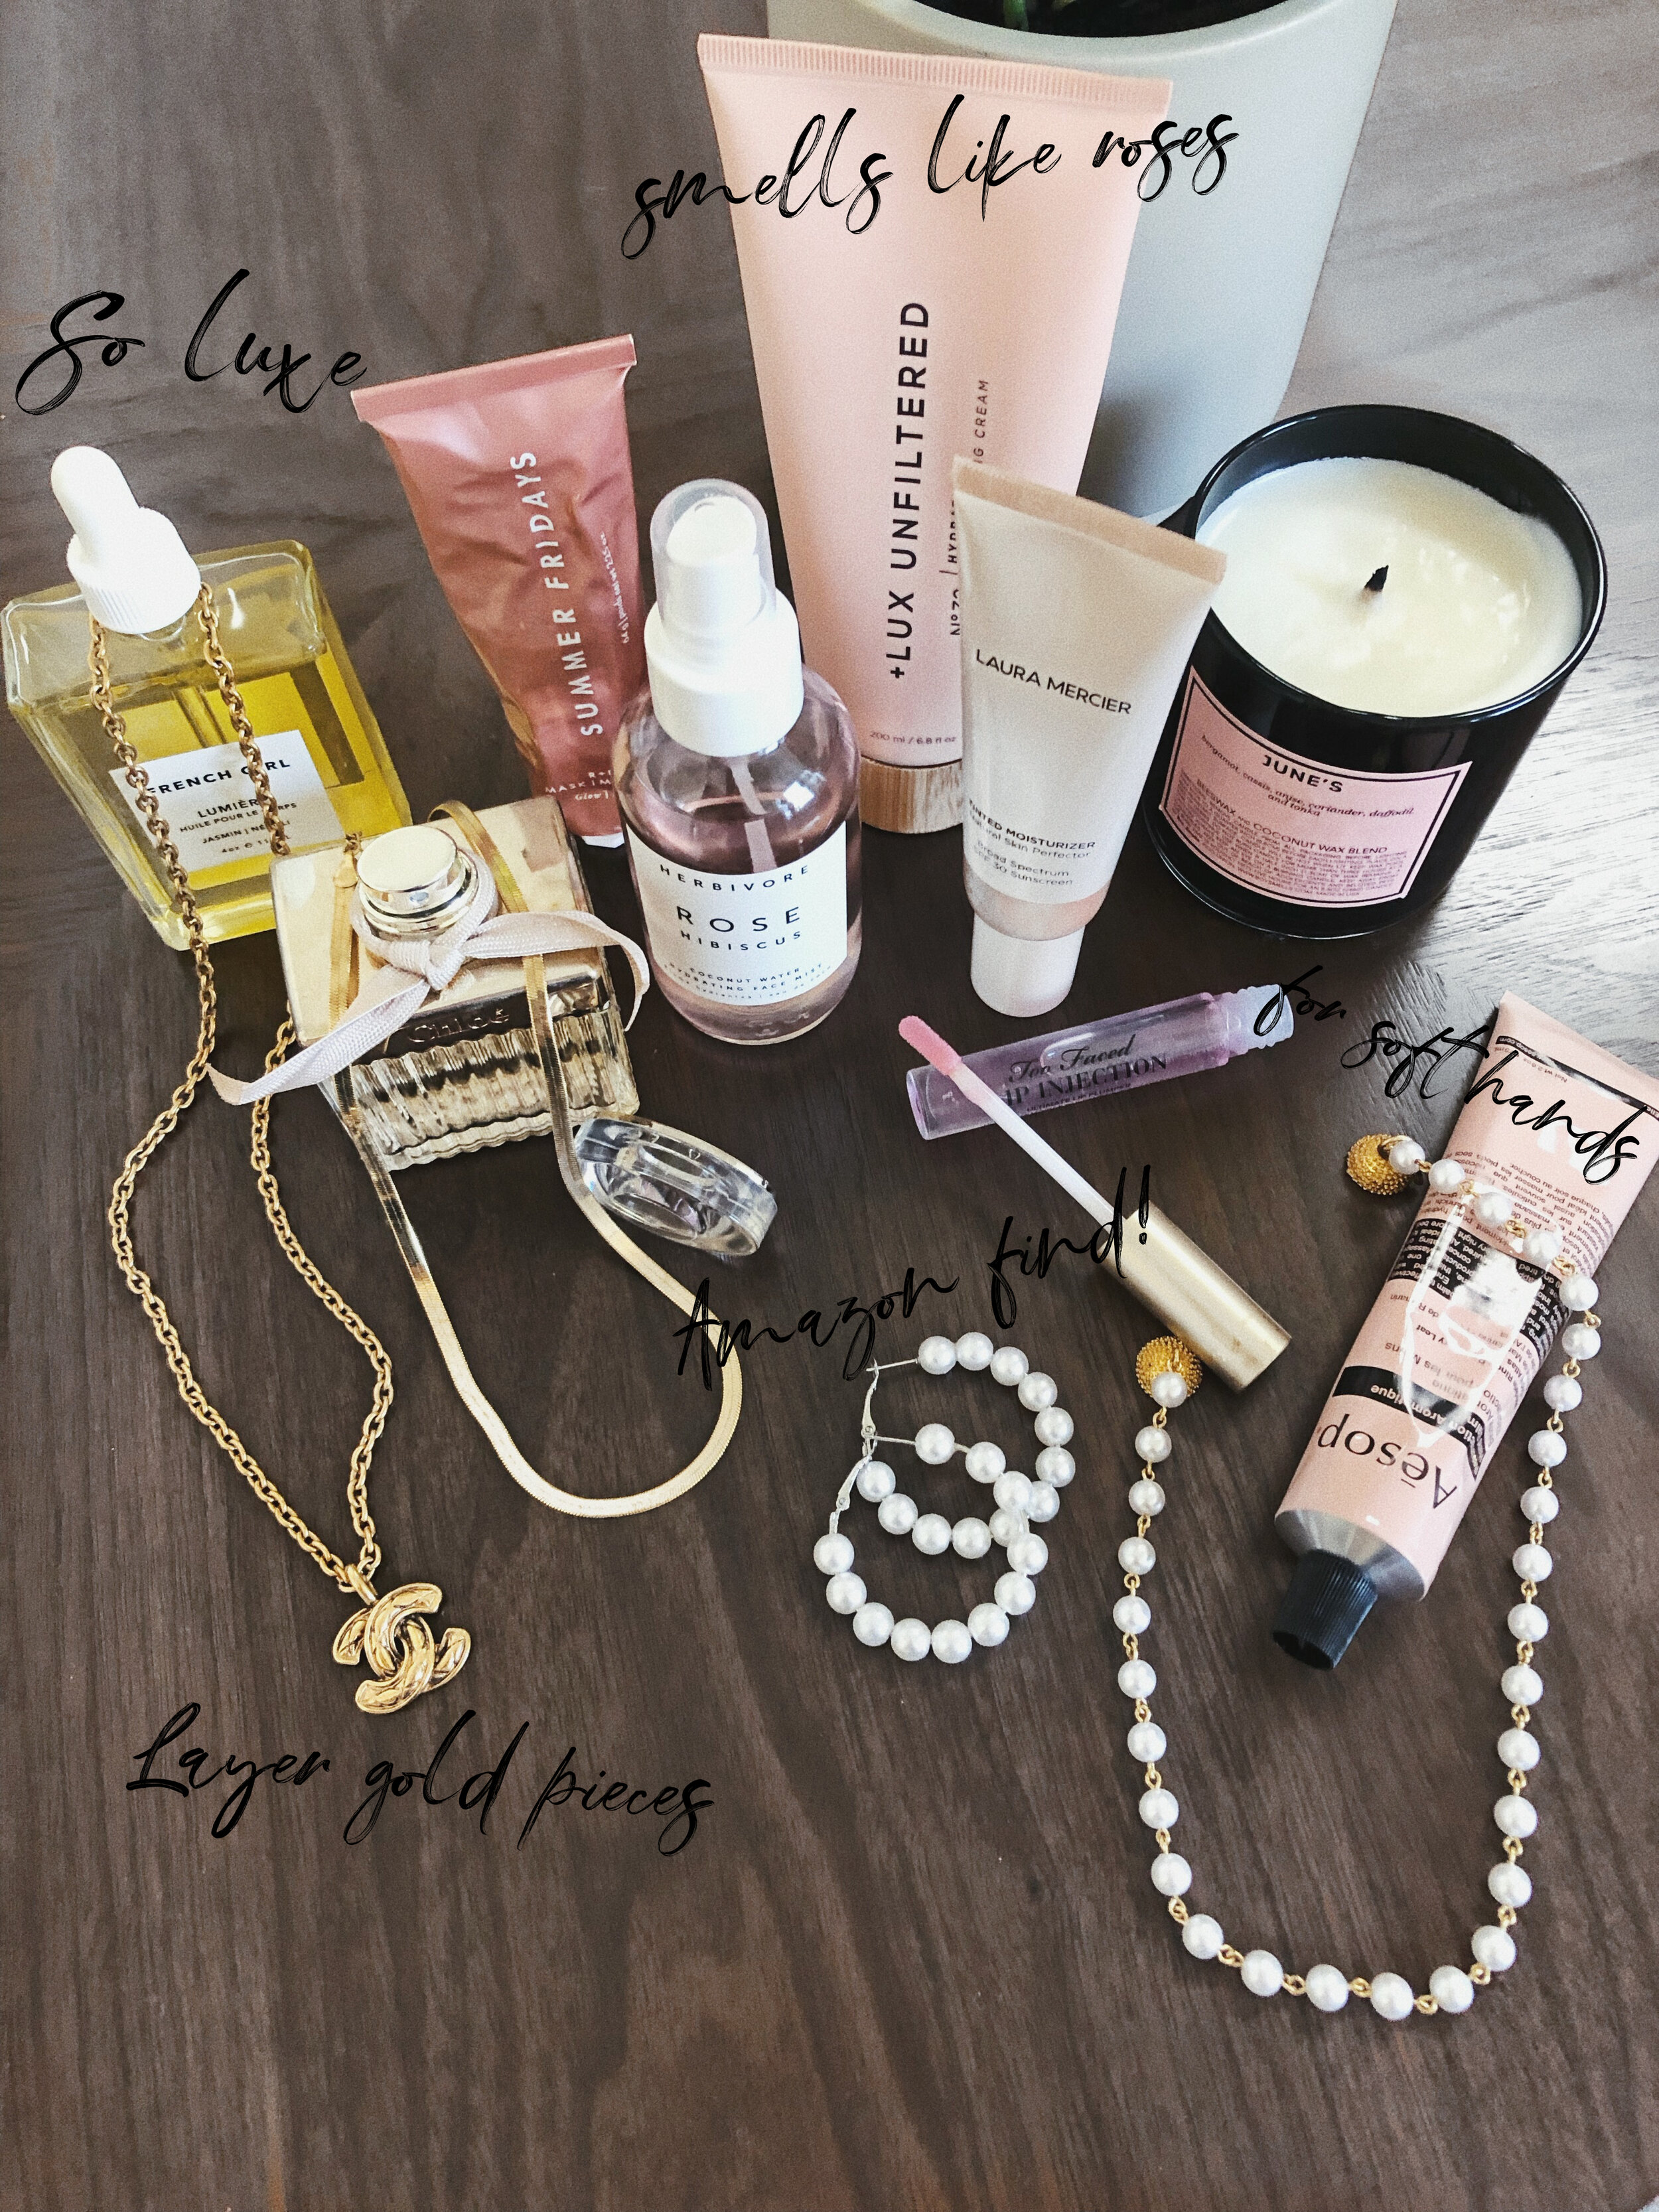 Products + Things I'm Loving Right Now — JASMIN WEARS